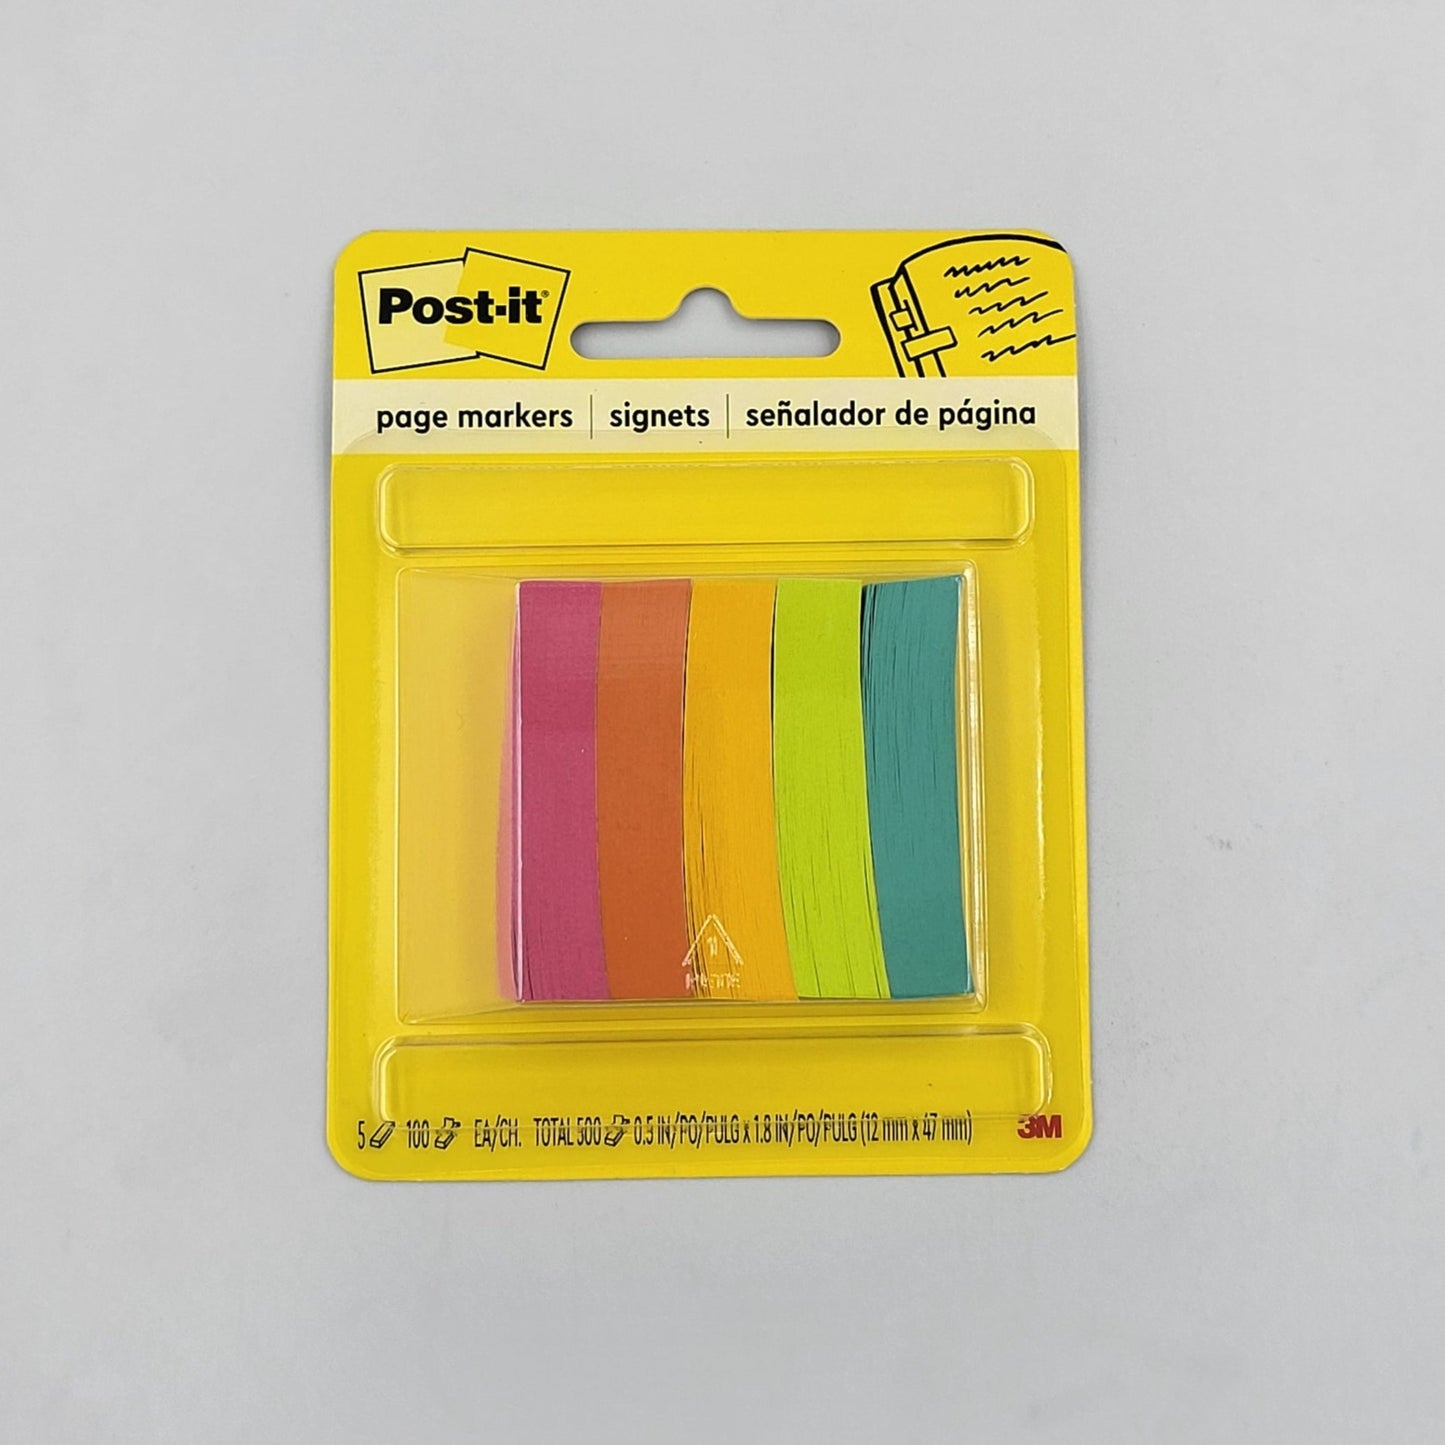 3M Post-it Page Markers 1/2" x 2" 5's Assorted Colors